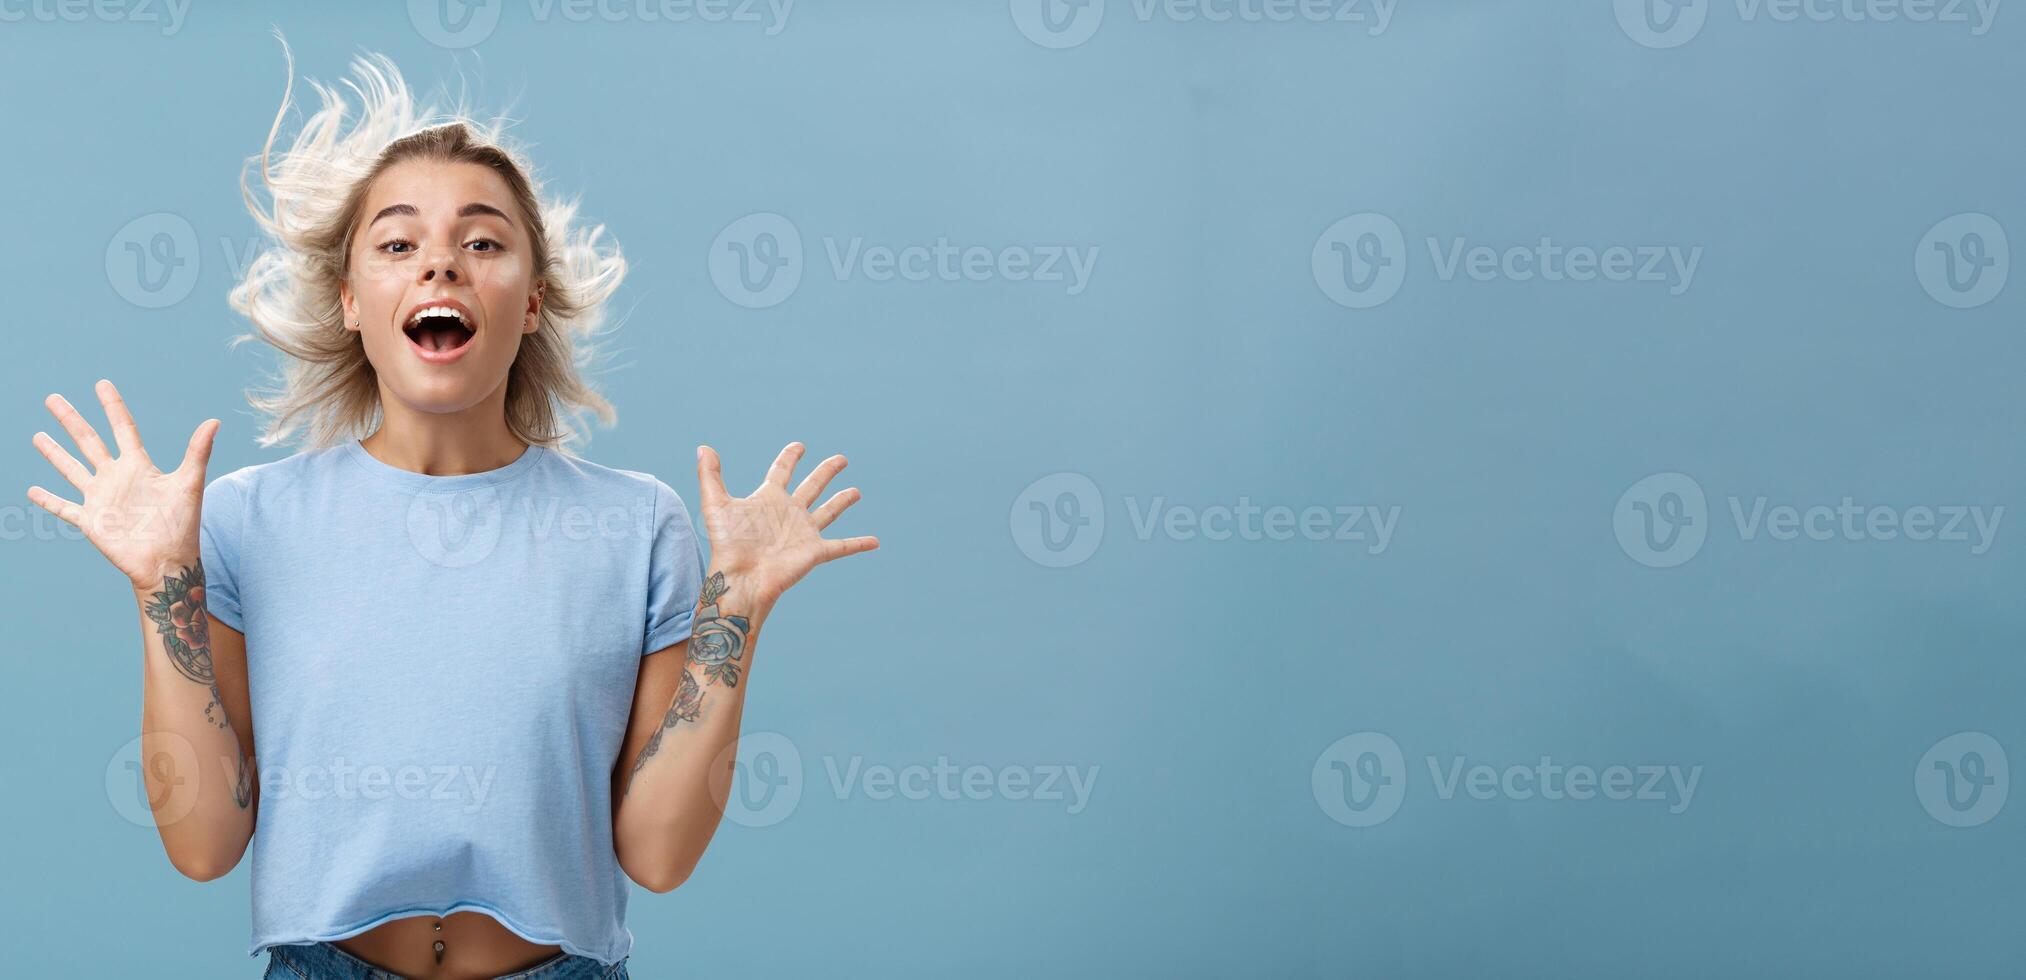 Creative happy and playful beautiful blond girl with tattoos on arms raising palms up opening mouth facing wind while hair strands flicking on air jumping having fun over blue background photo